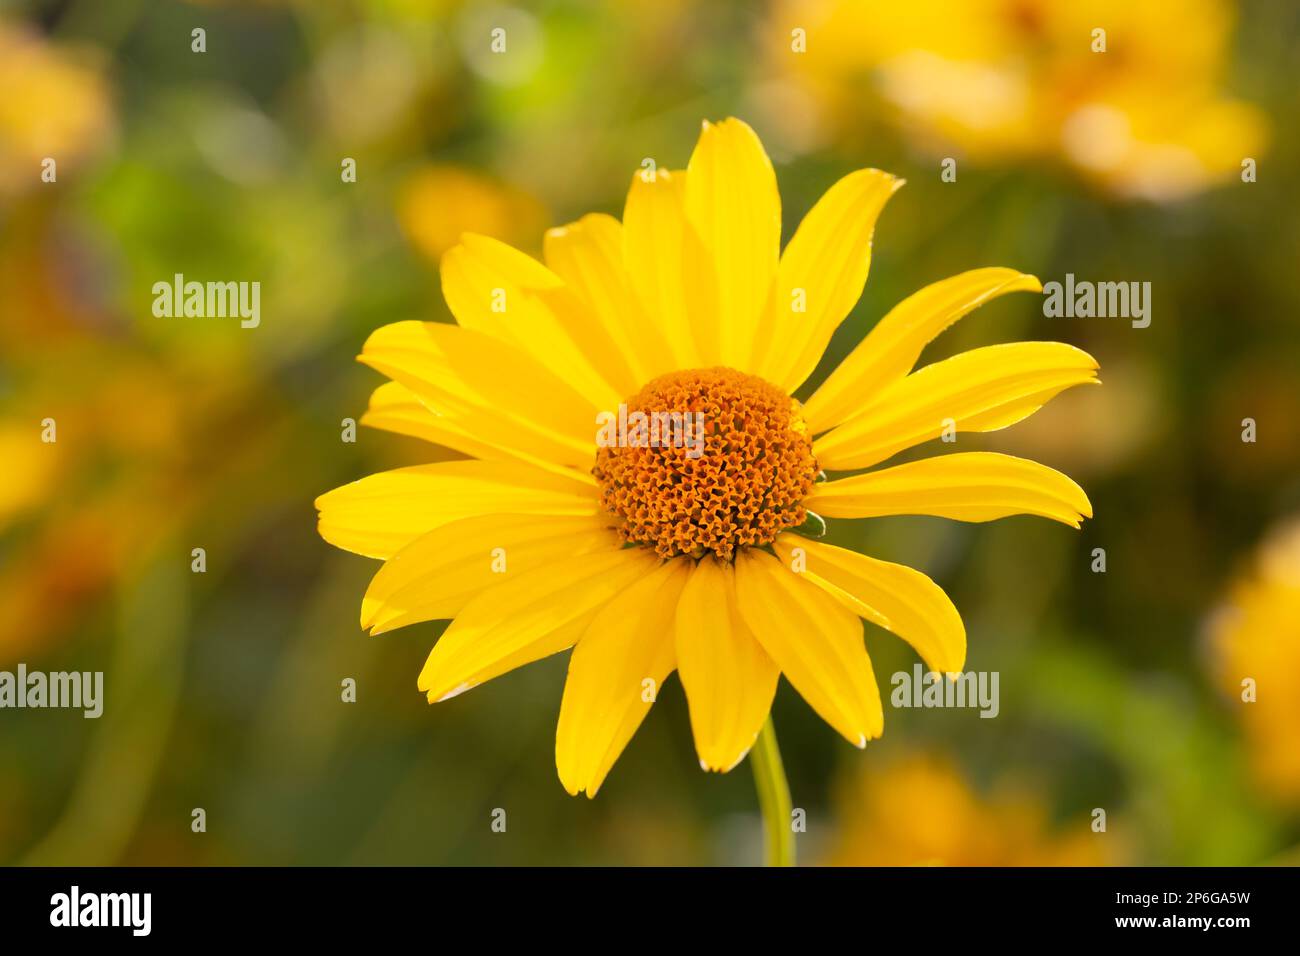 Heliopsis helianthoides, false sunflower, in bloom. A beautiful yellow flower on a yellow blurry background. Floral summer yellow background Stock Photo